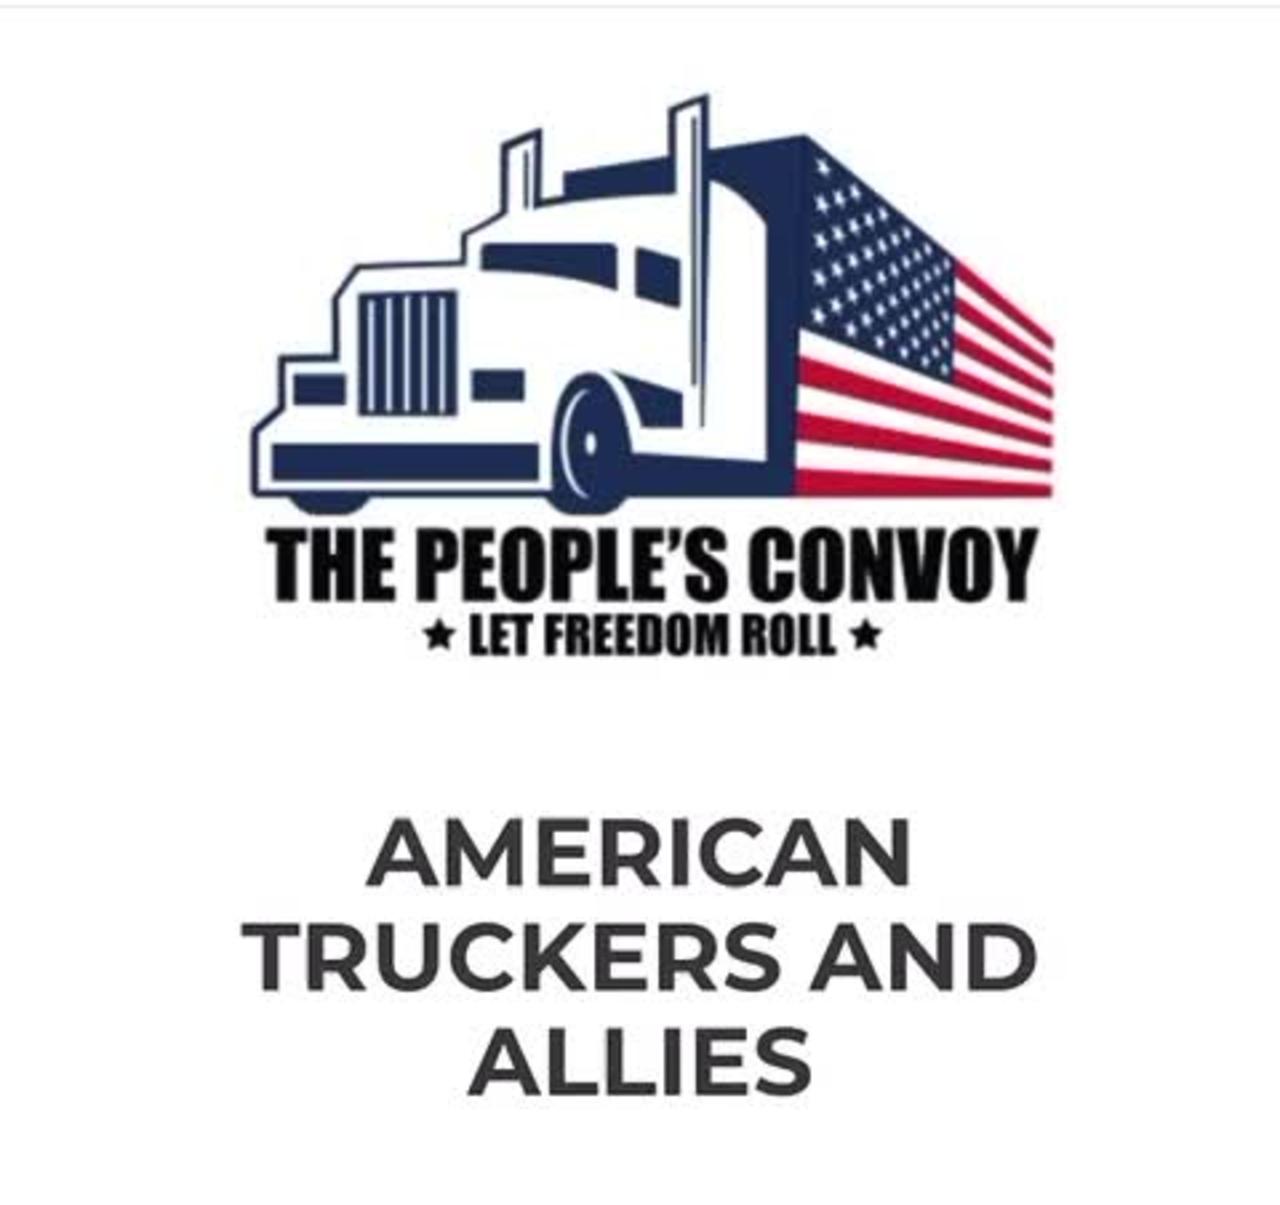 Live - The Peoples Convoy - Morning Meeting - Heading to Midland TX